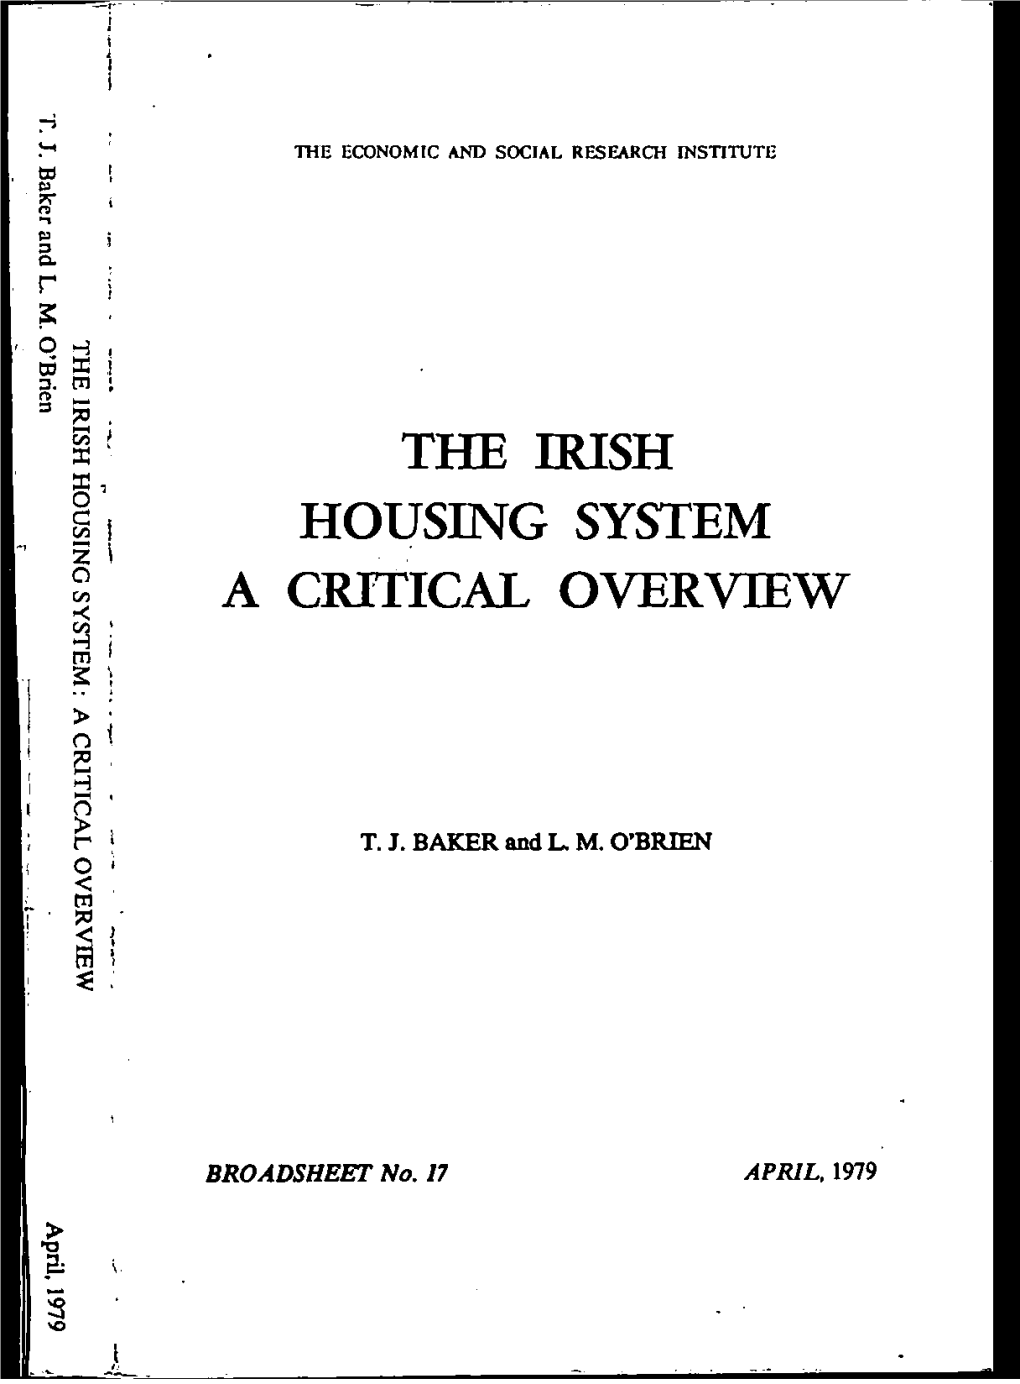 The Irish Housing System a Critical Overview